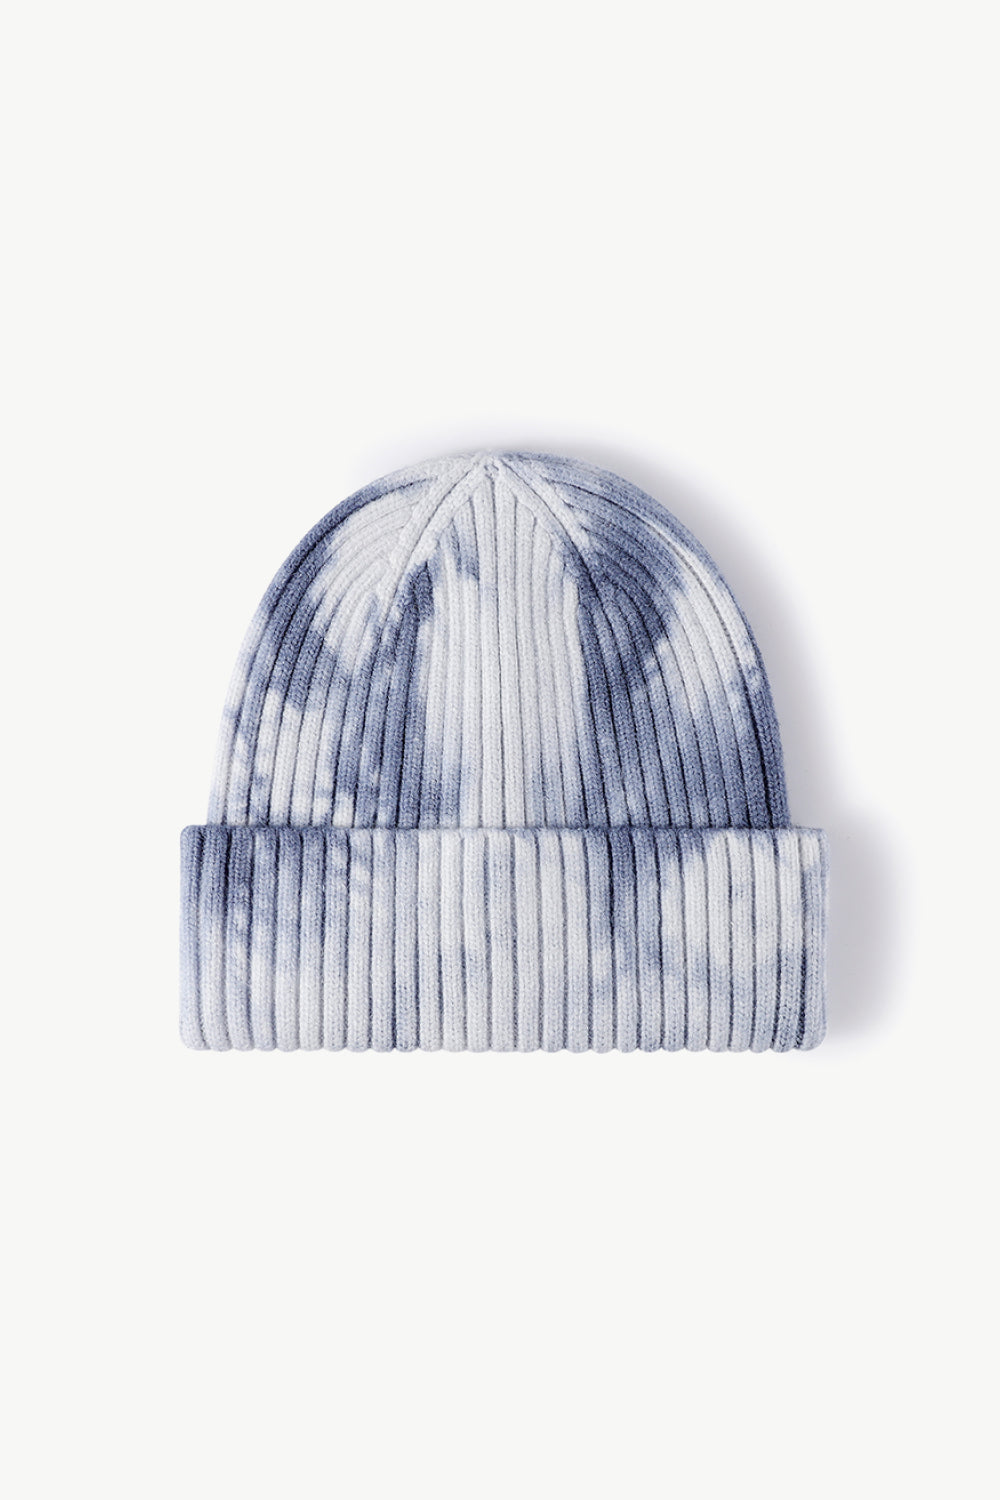 White Smoke Tie-Dye Ribbed Cuffed Beanie Sentient Beauty Fashions *Accessories